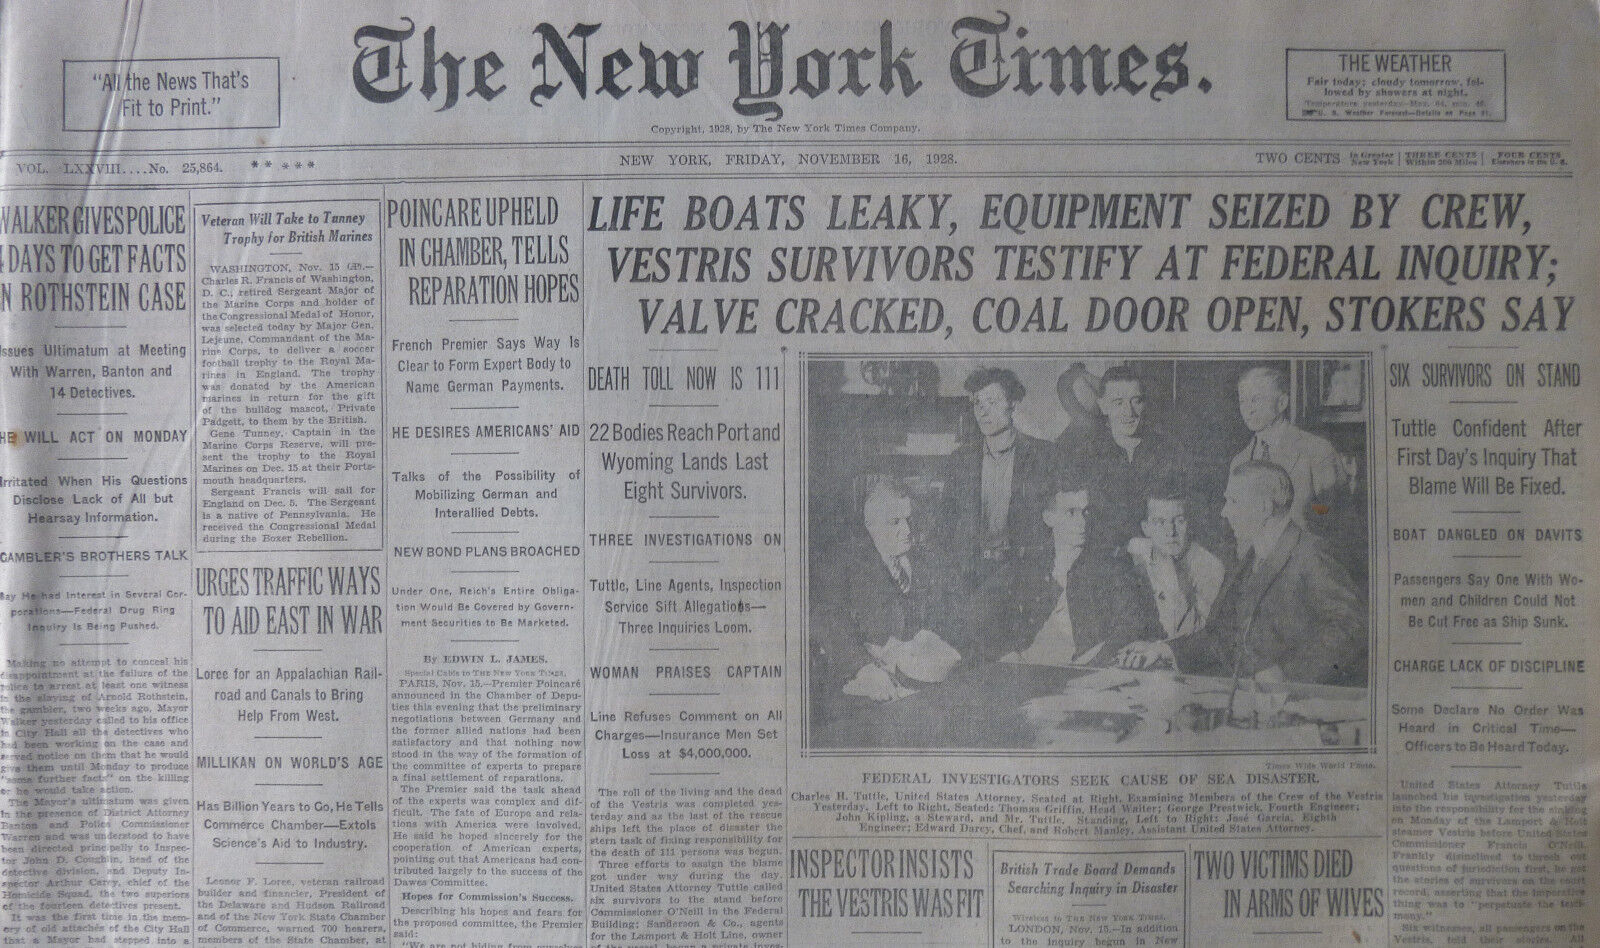 11-1928 November 16 VESTRIS DISASTER FEDERAL INQUIRY LEAKY BOATS WYOMING 